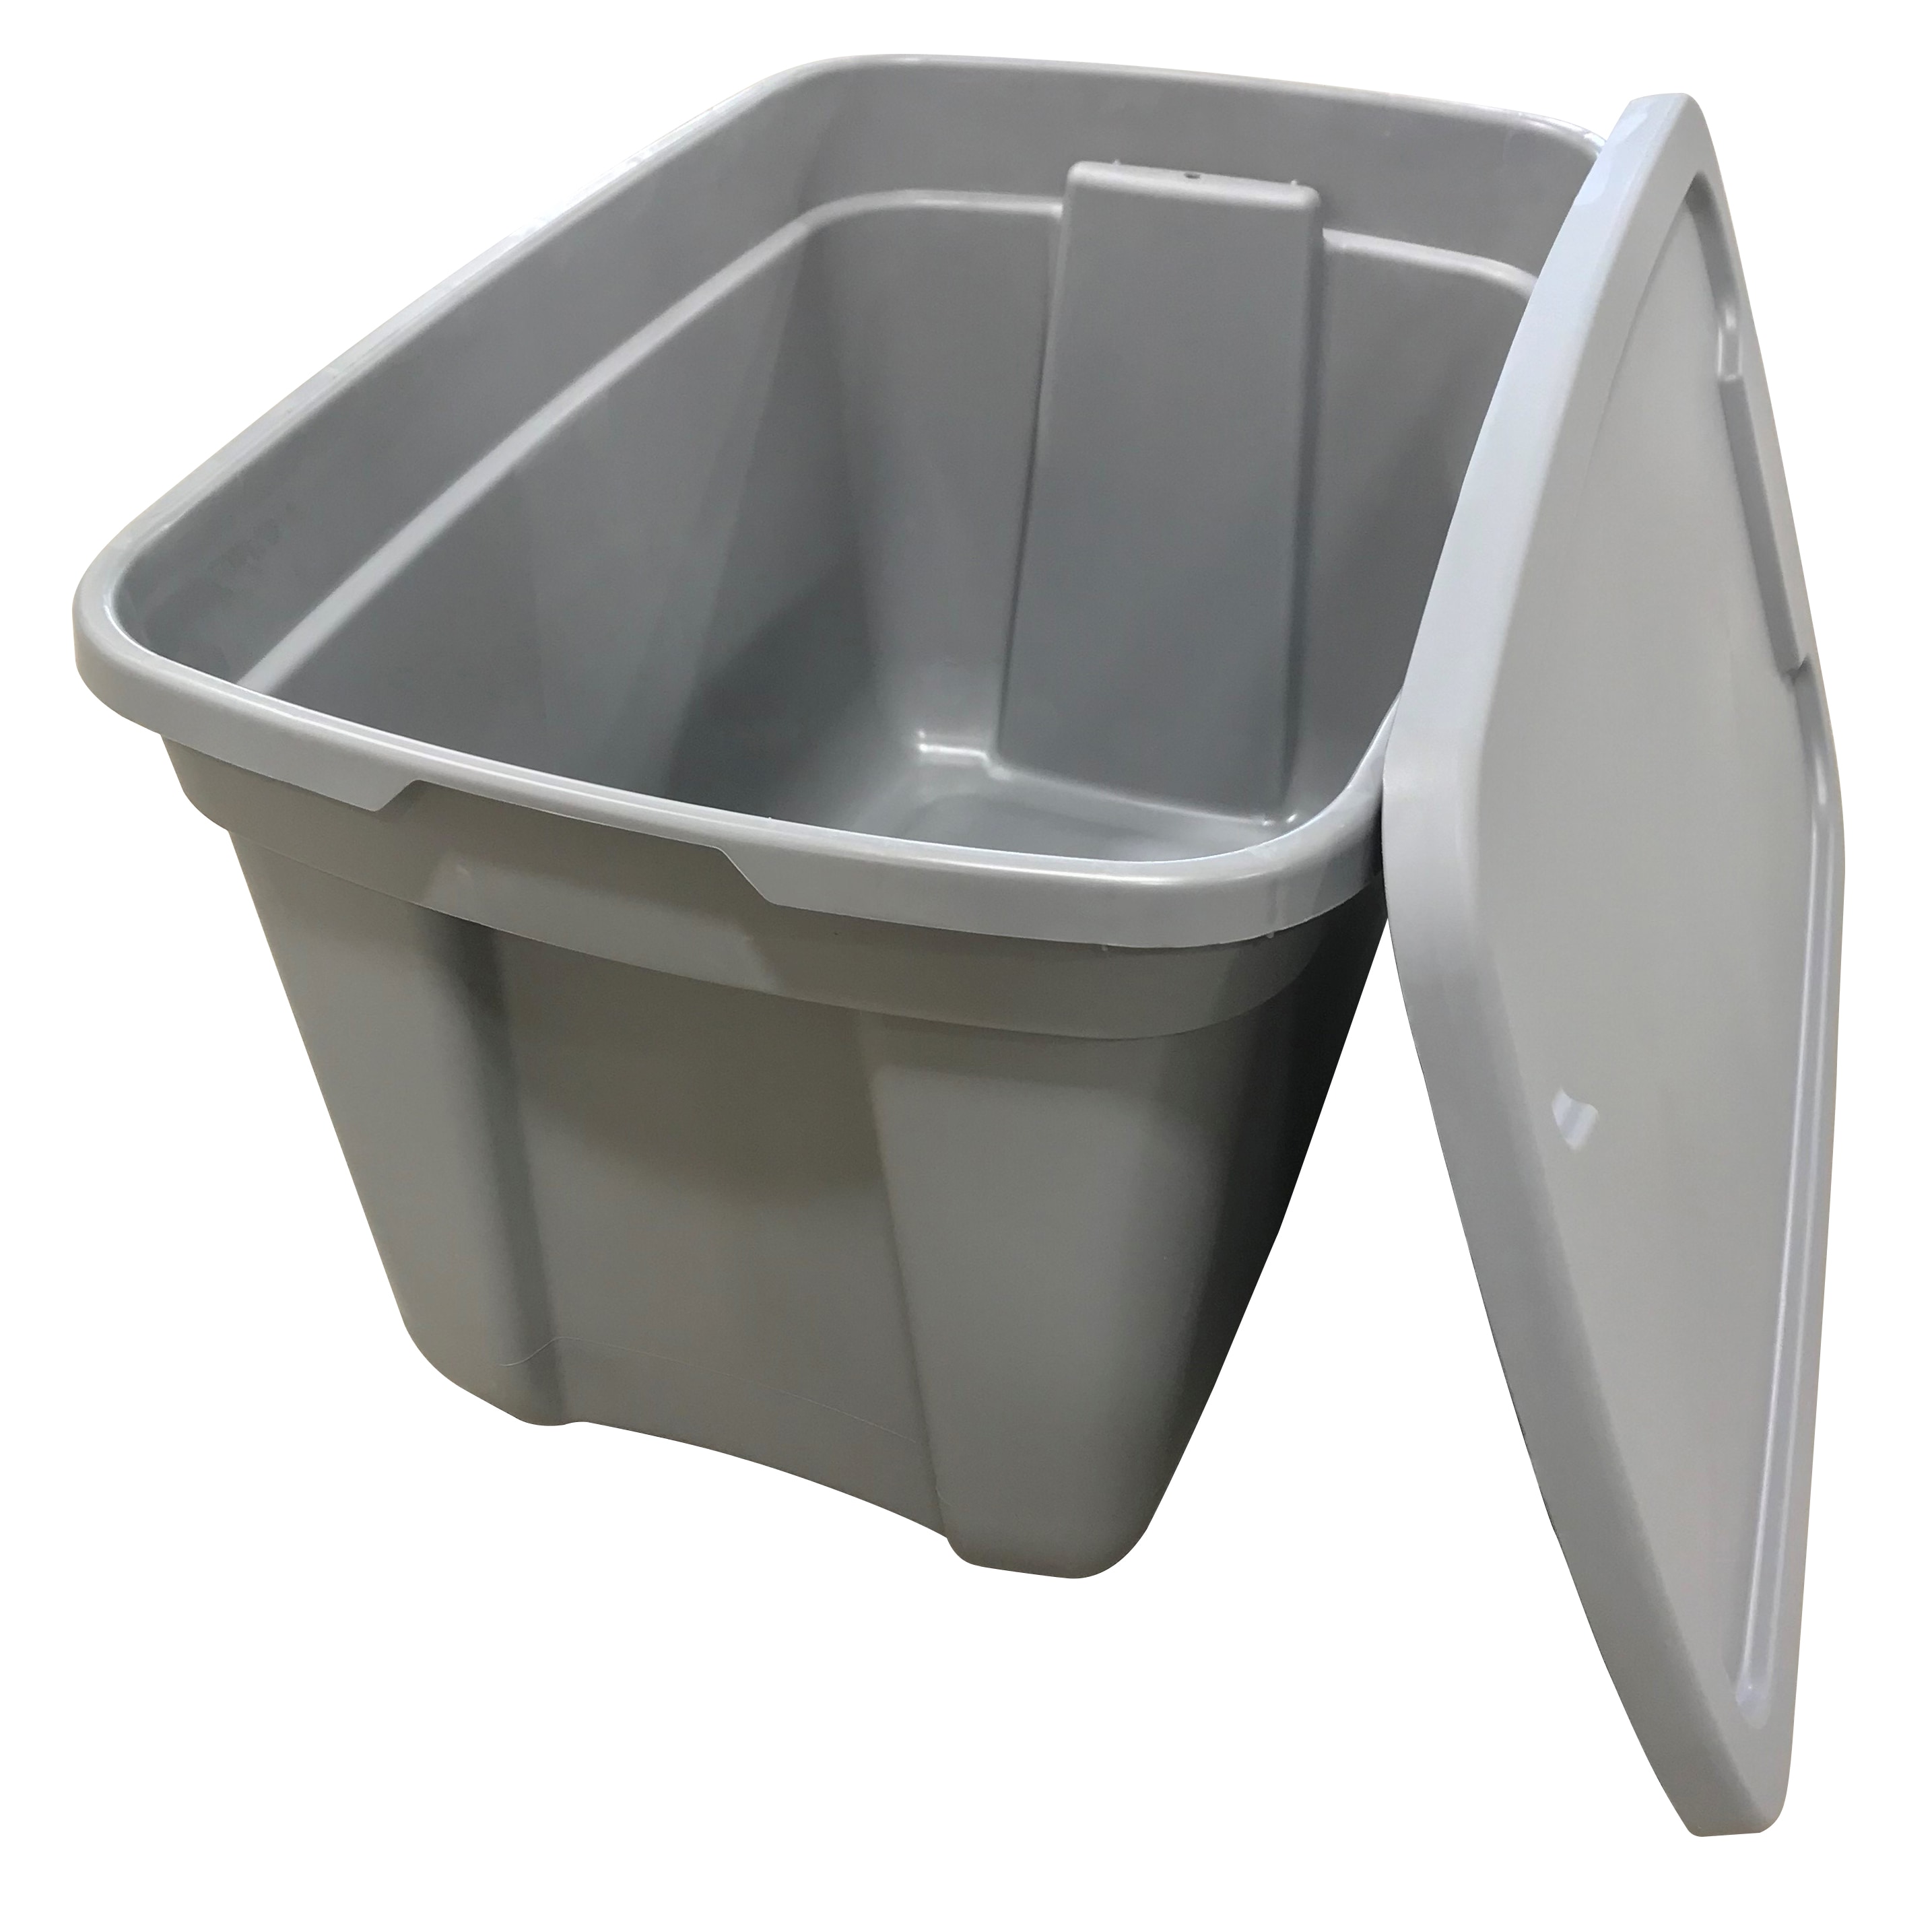 30 Gallon Plastic Tote with Lid - Lodging Kit Company